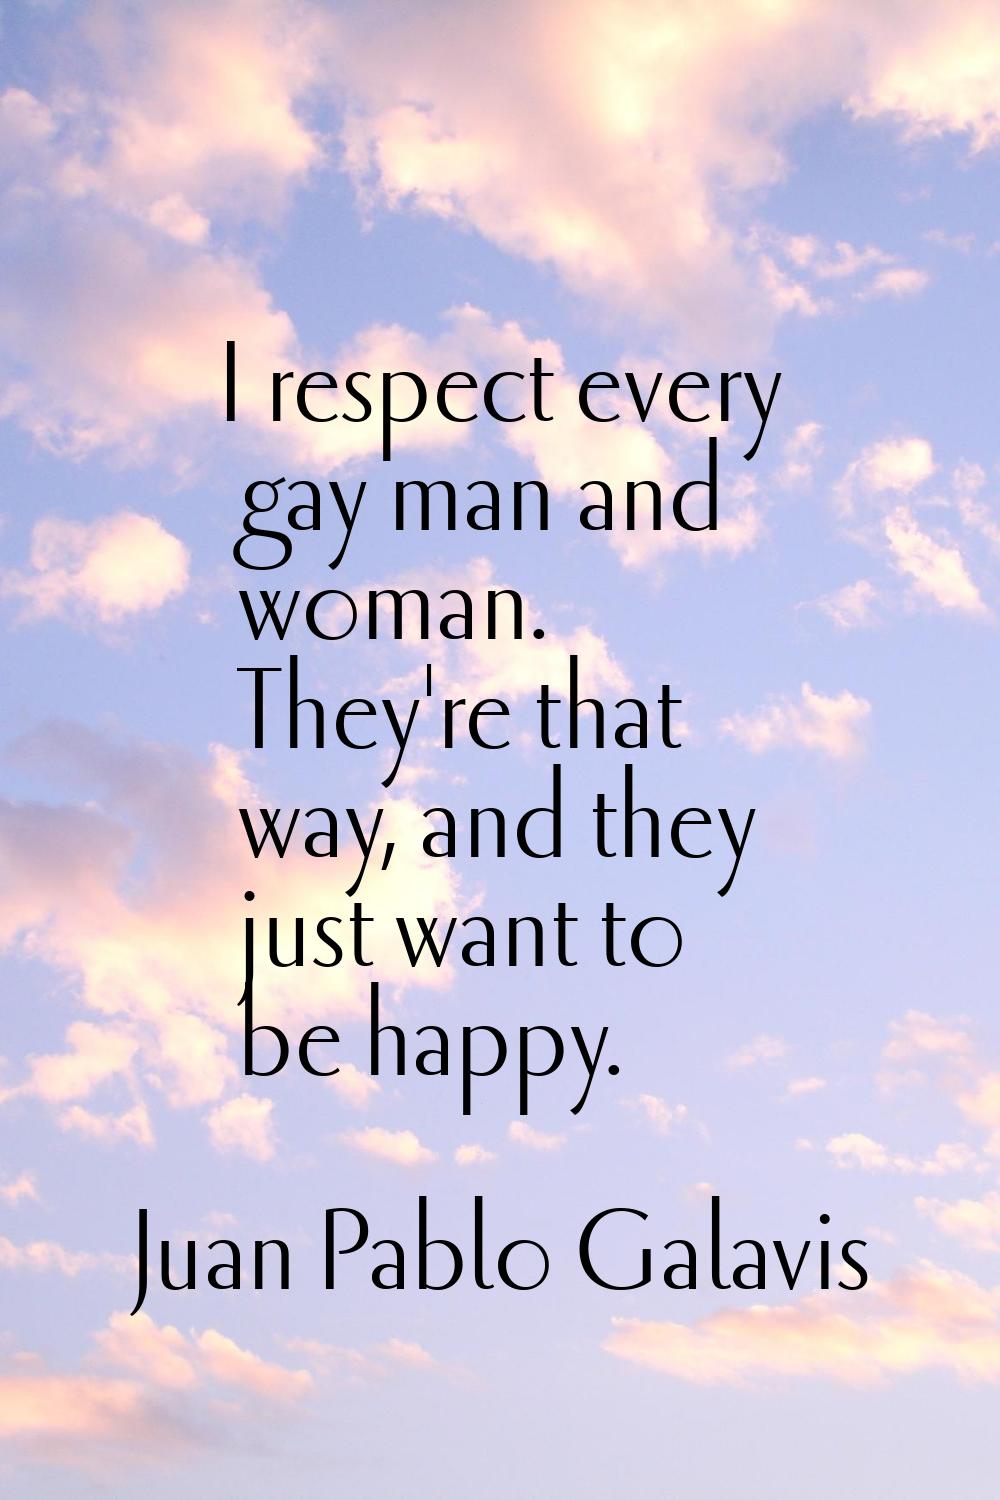 I respect every gay man and woman. They're that way, and they just want to be happy.